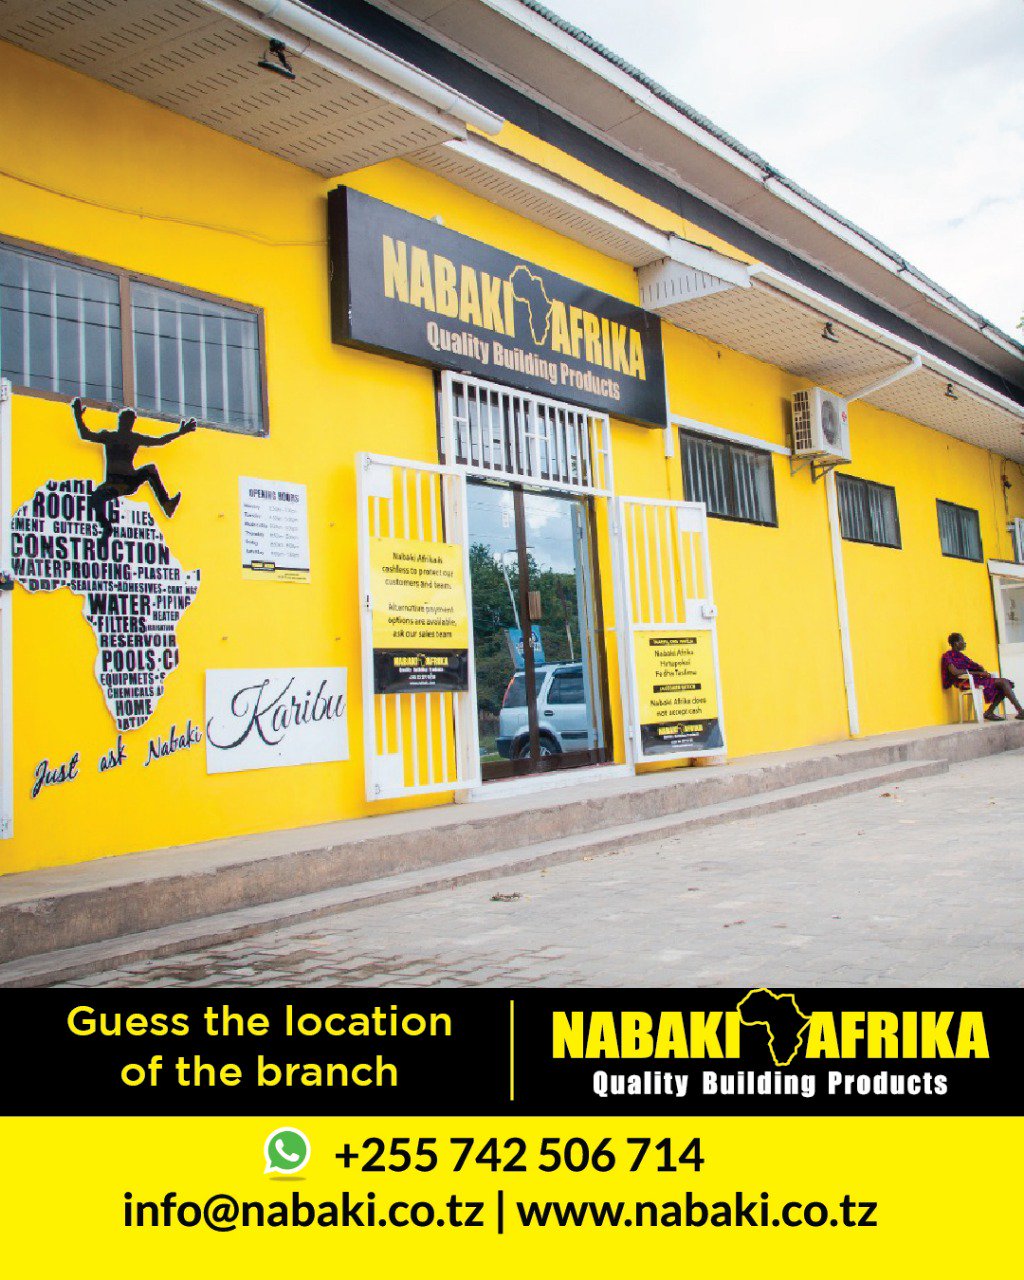 telegram betalingsmiddel over Nabaki Afrika Ltd on Twitter: "Can you guess which Nabaki branch this is?  #guessthebranch #NabakiAfrika #Tanzania https://t.co/1mGpTTqSZz" / Twitter